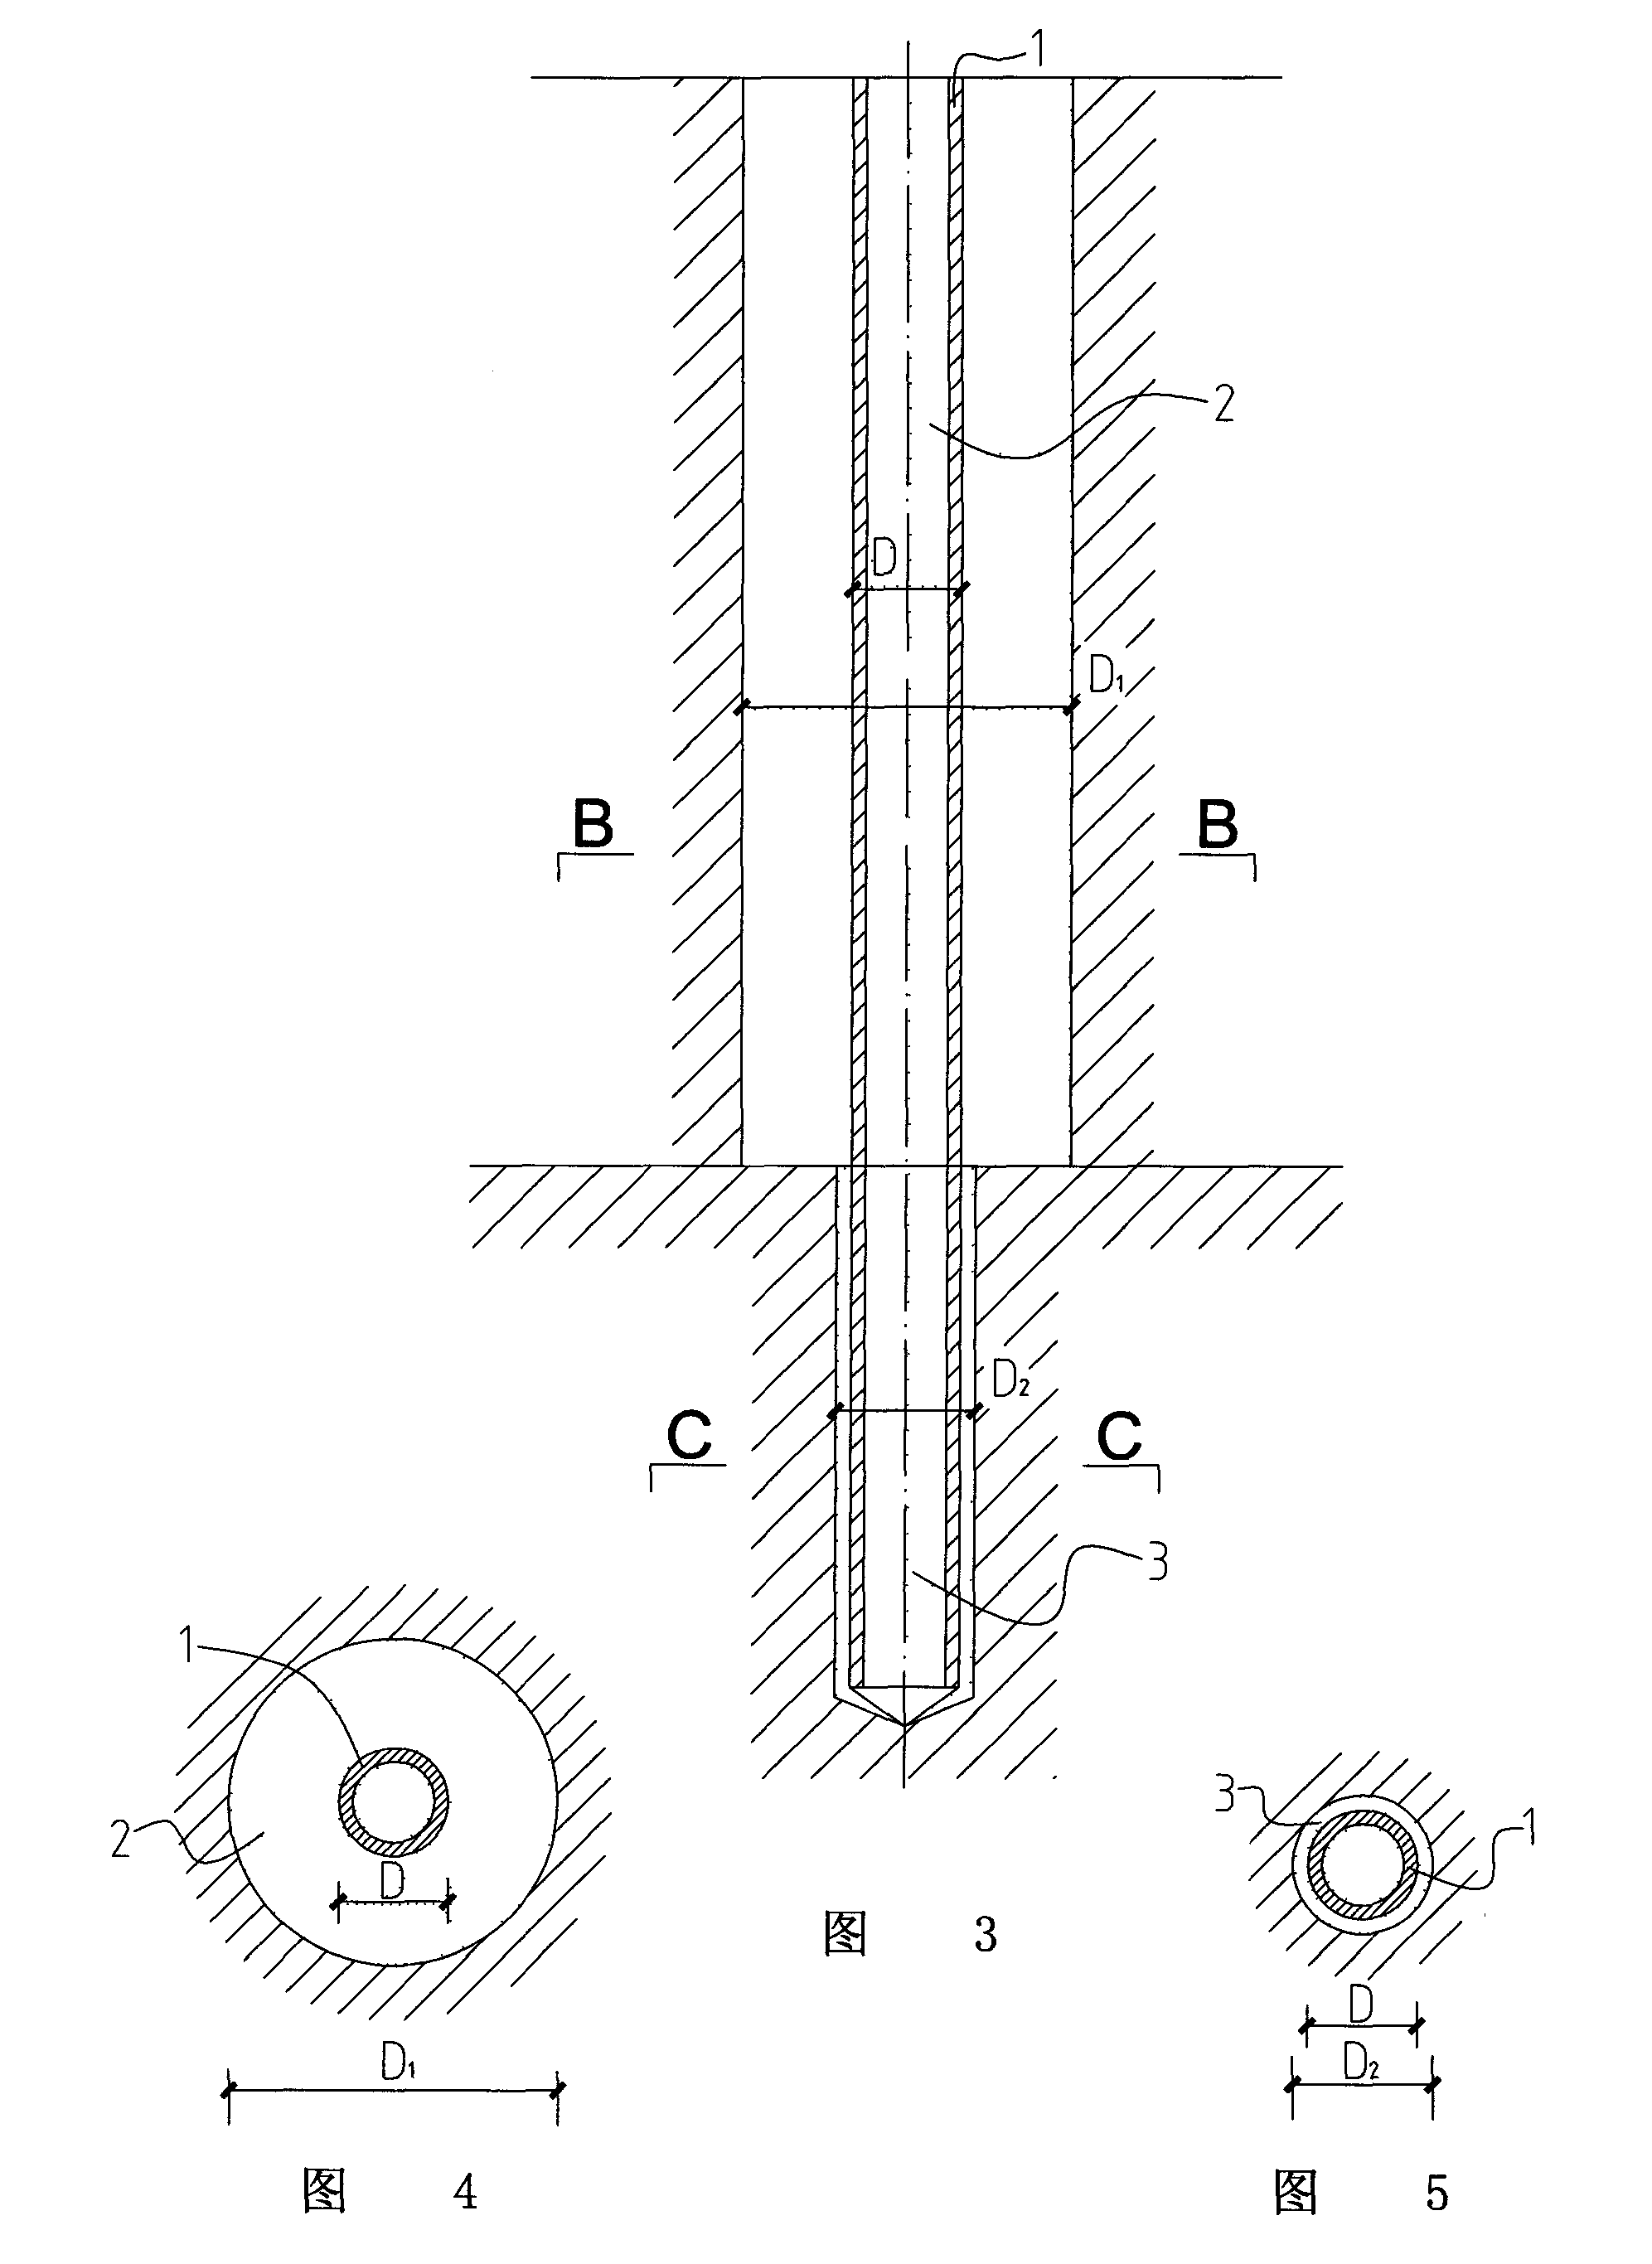 Construction method of composite pile with implanting-in rigid-body embedded into hard bearing stratum